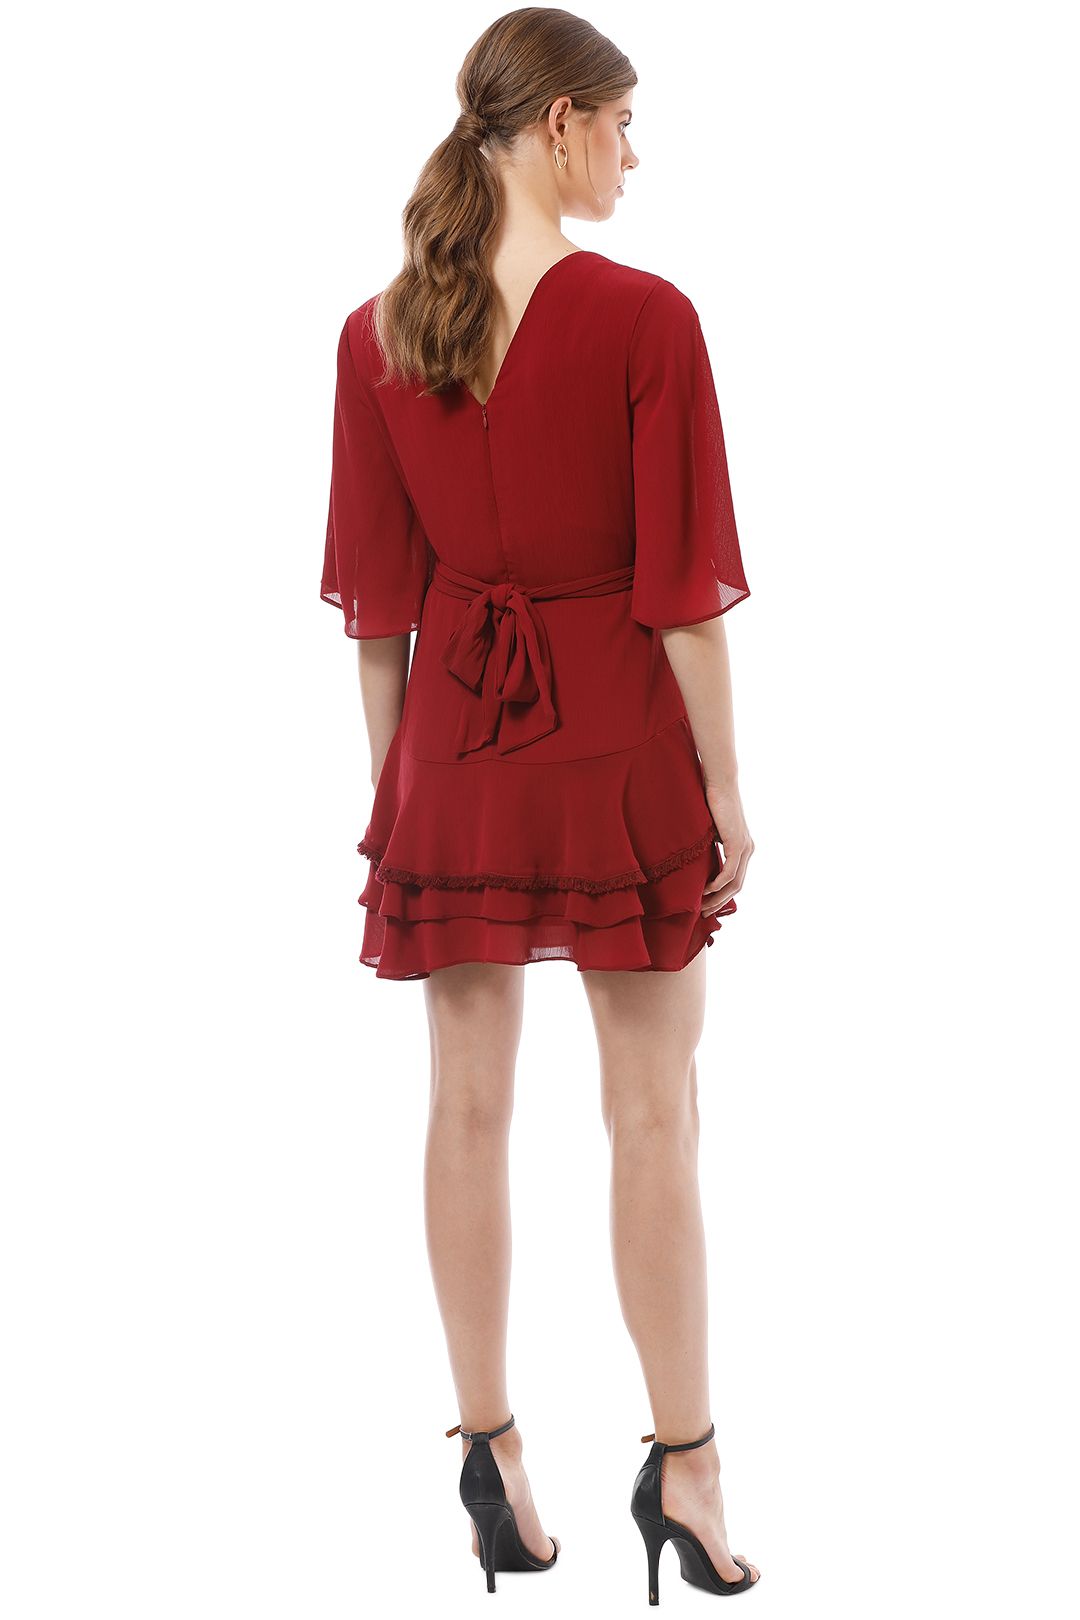 Tussah - Stacey Ruffle Mini Dress - Red - Back